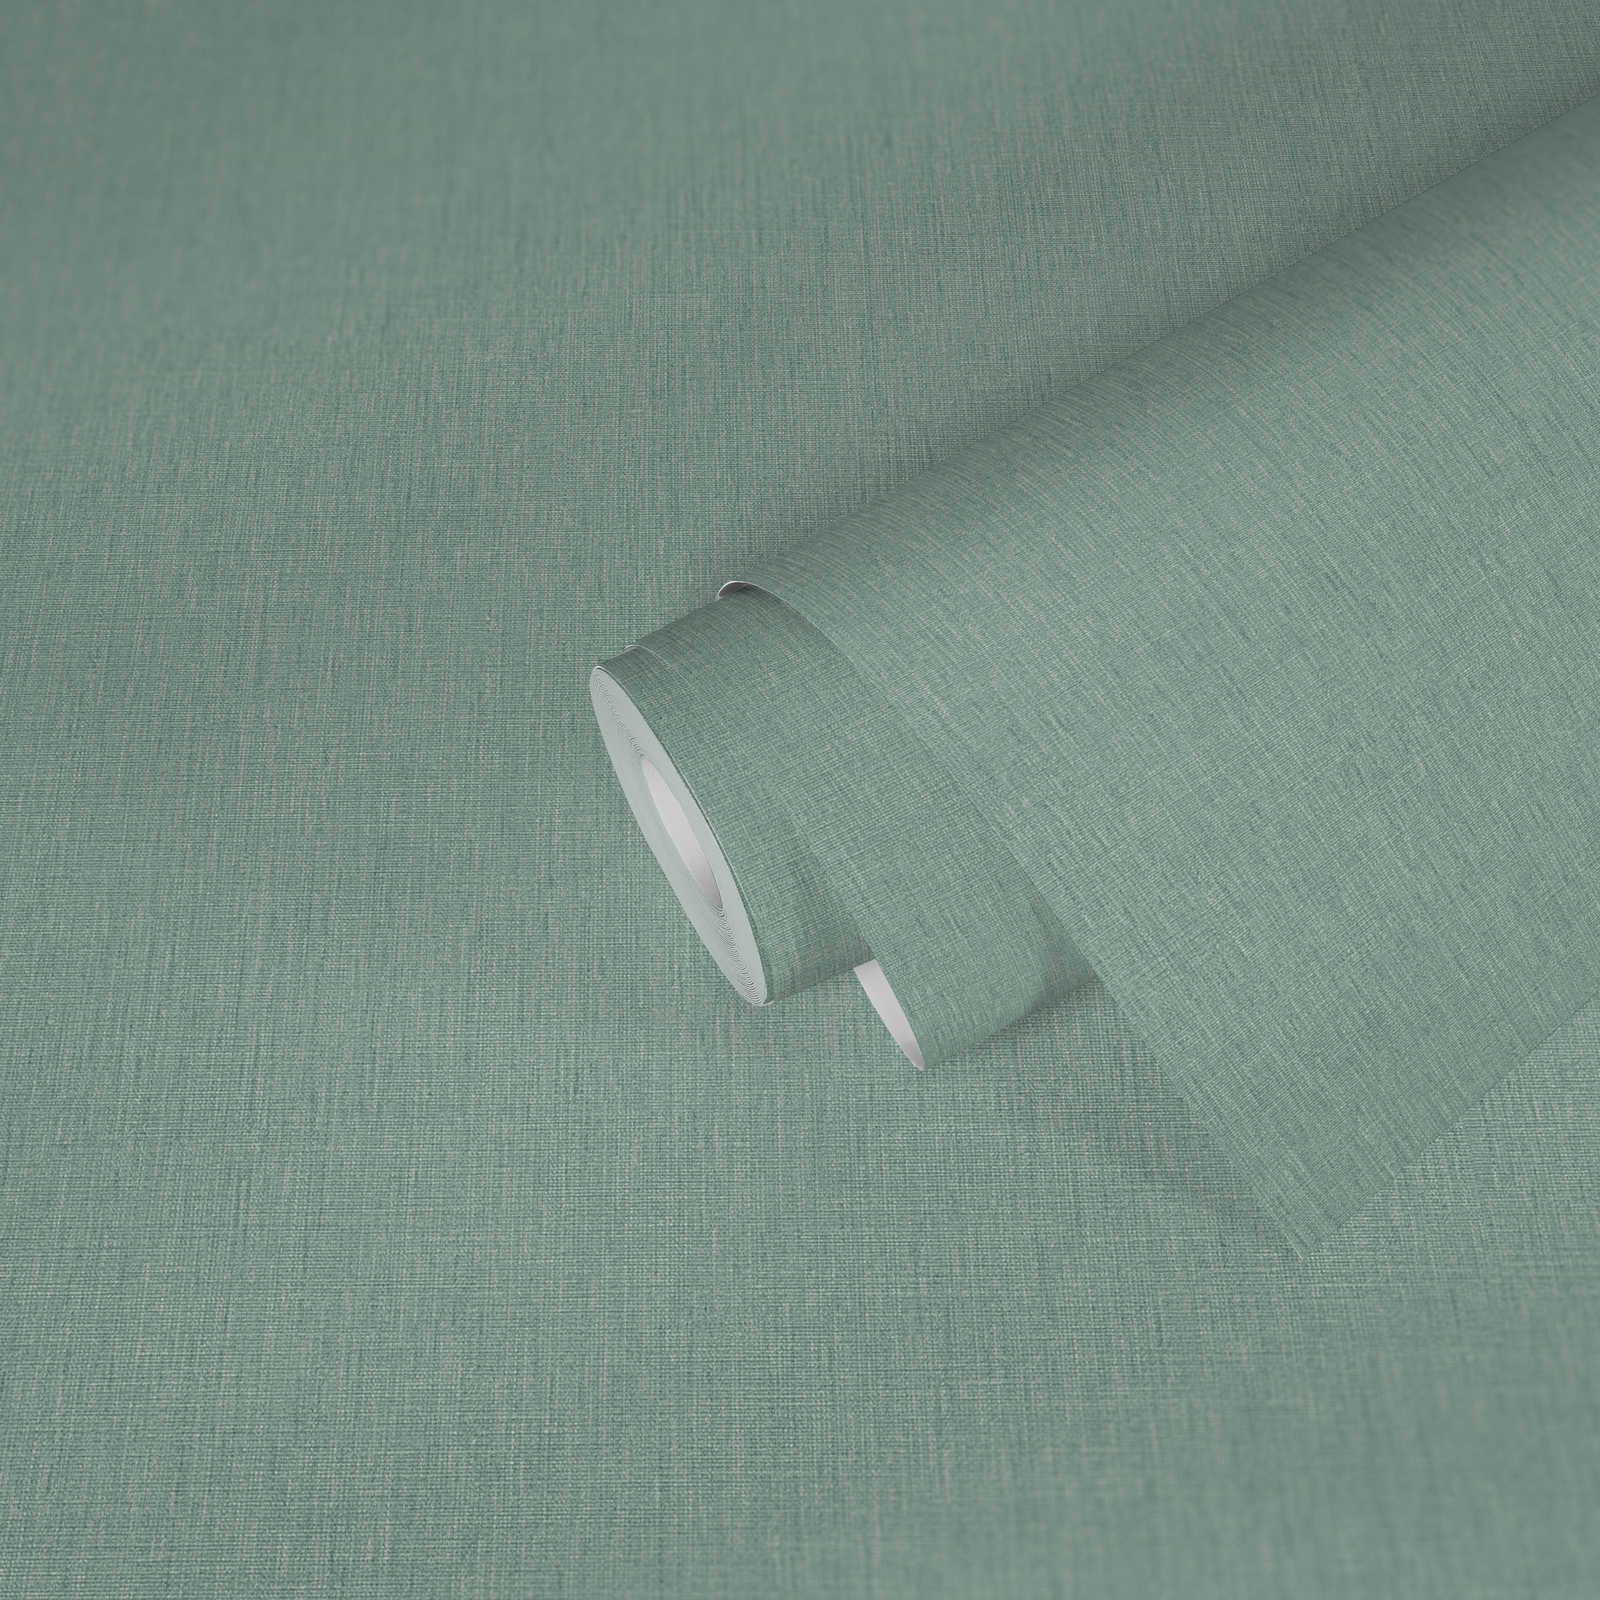             Plain wallpaper in textile look - green, turquoise, blue
        